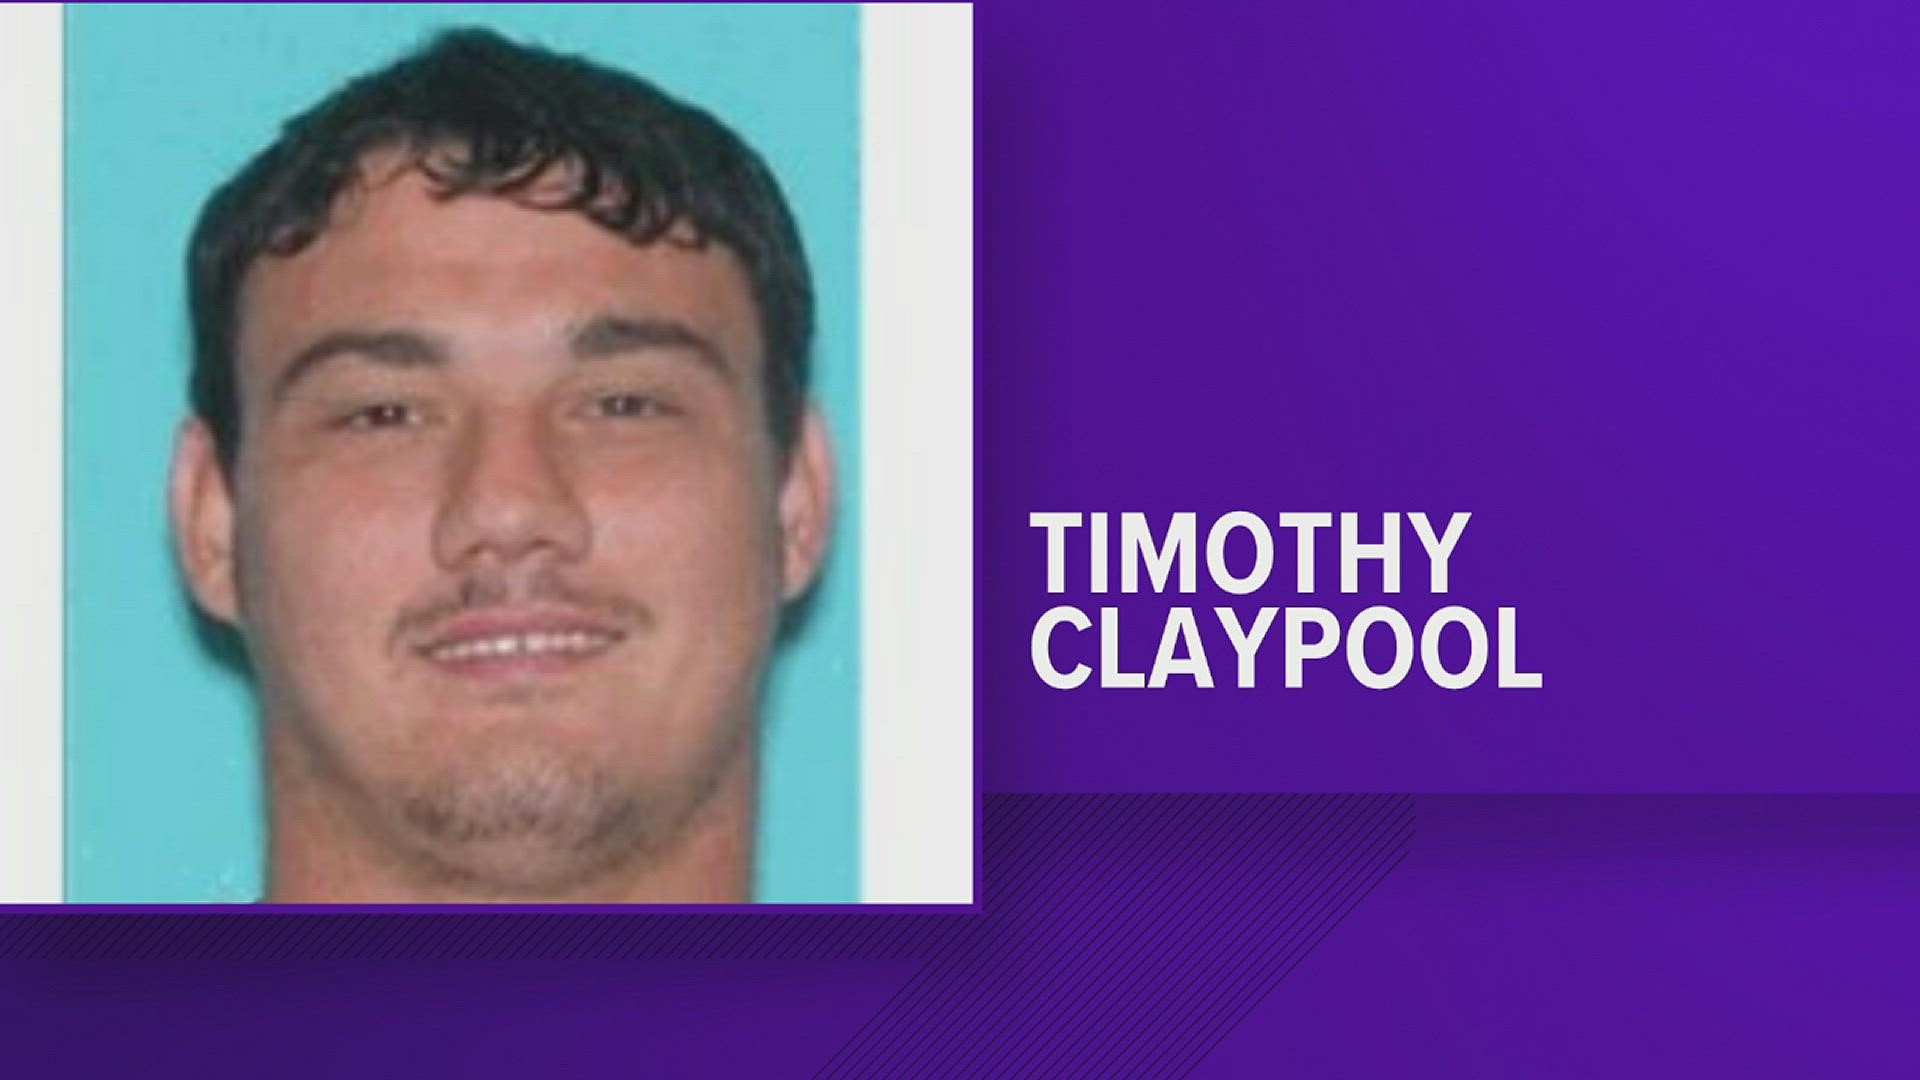 He is currently wanted on a theft charge from Jefferson County and failure to appear in Hardin County police say.